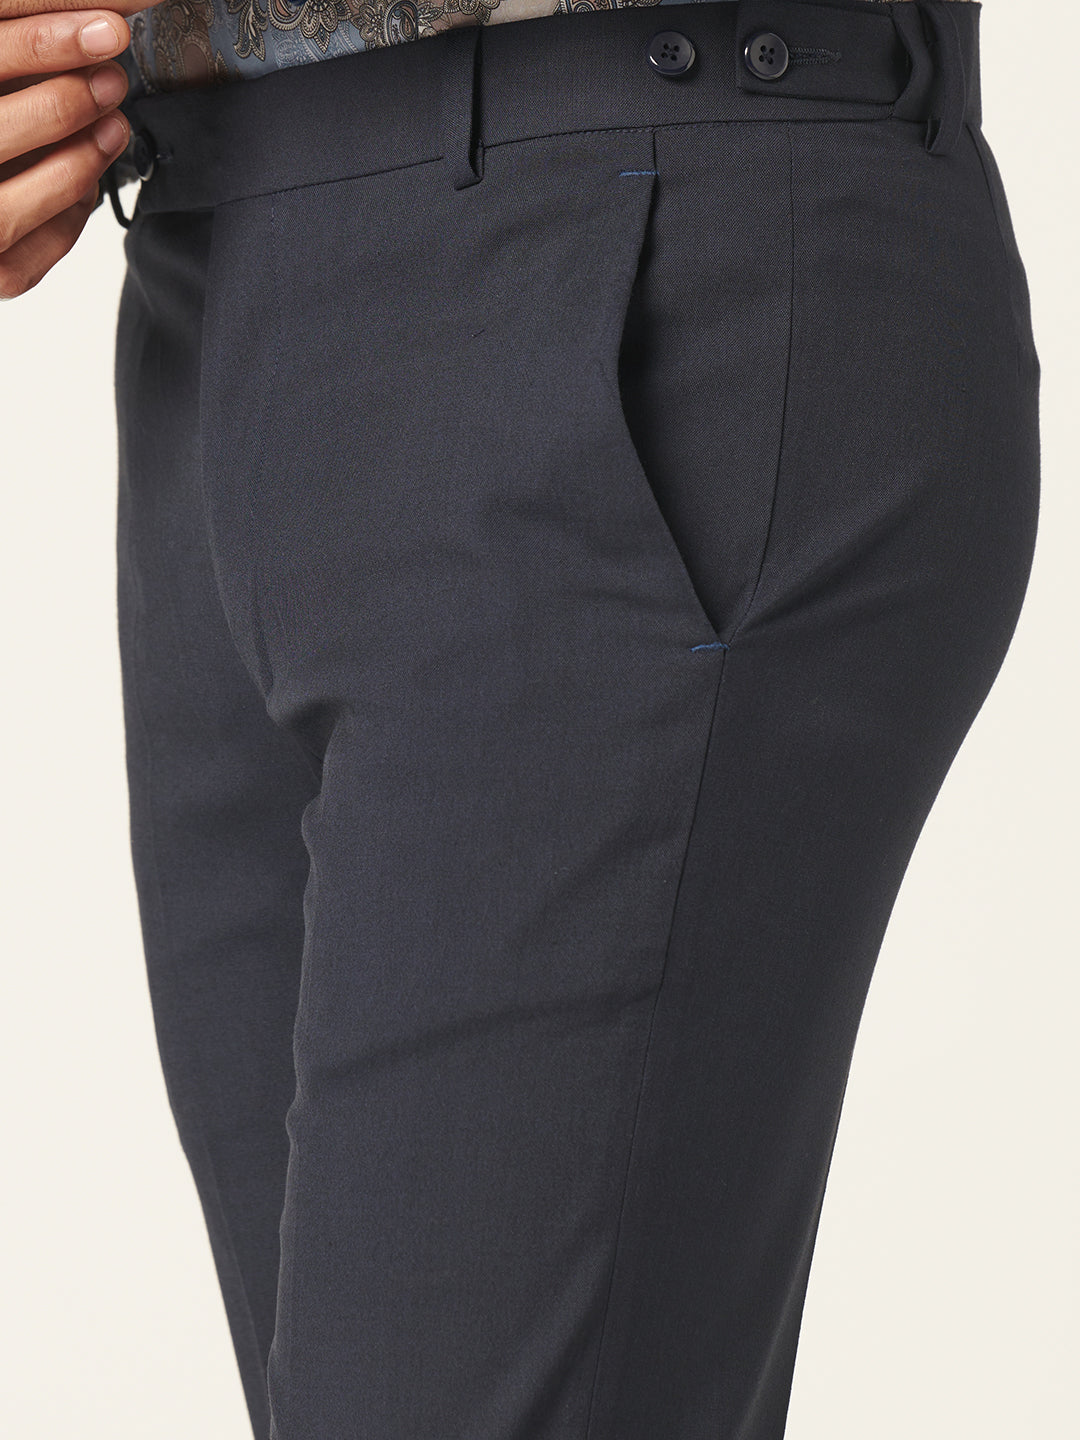 WILL SERVIVE TROUSER